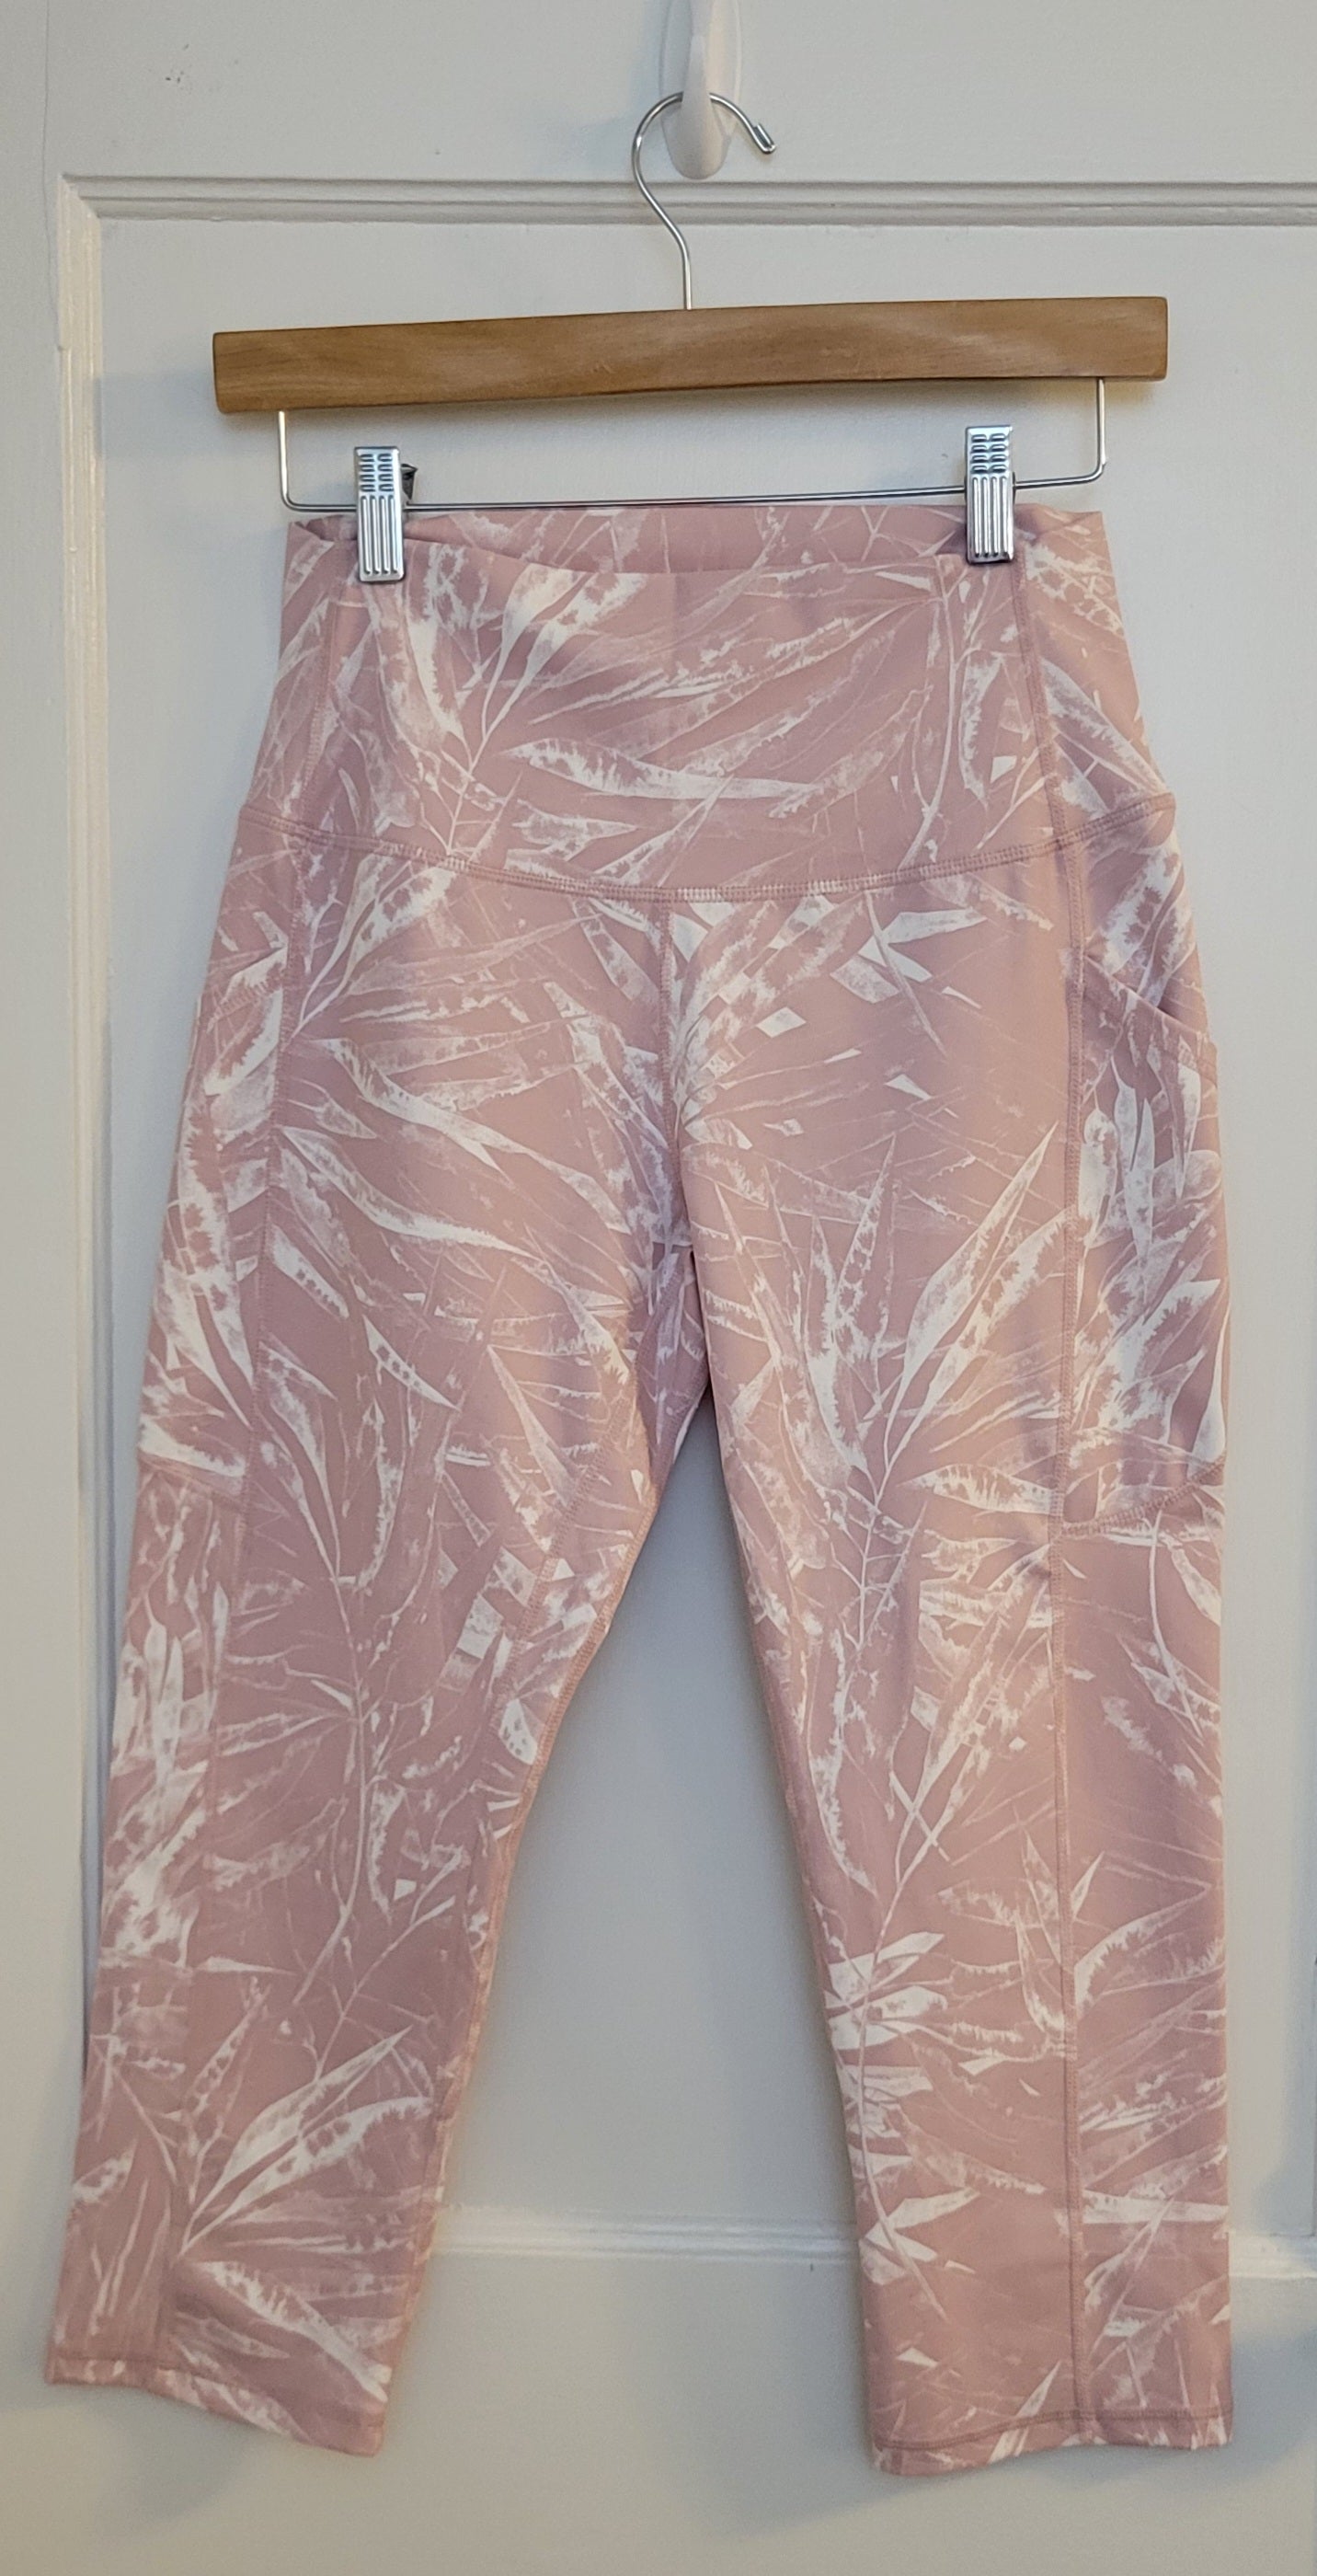 Ododos Pink and White Patterned Cropped Leggings, Women's Size L